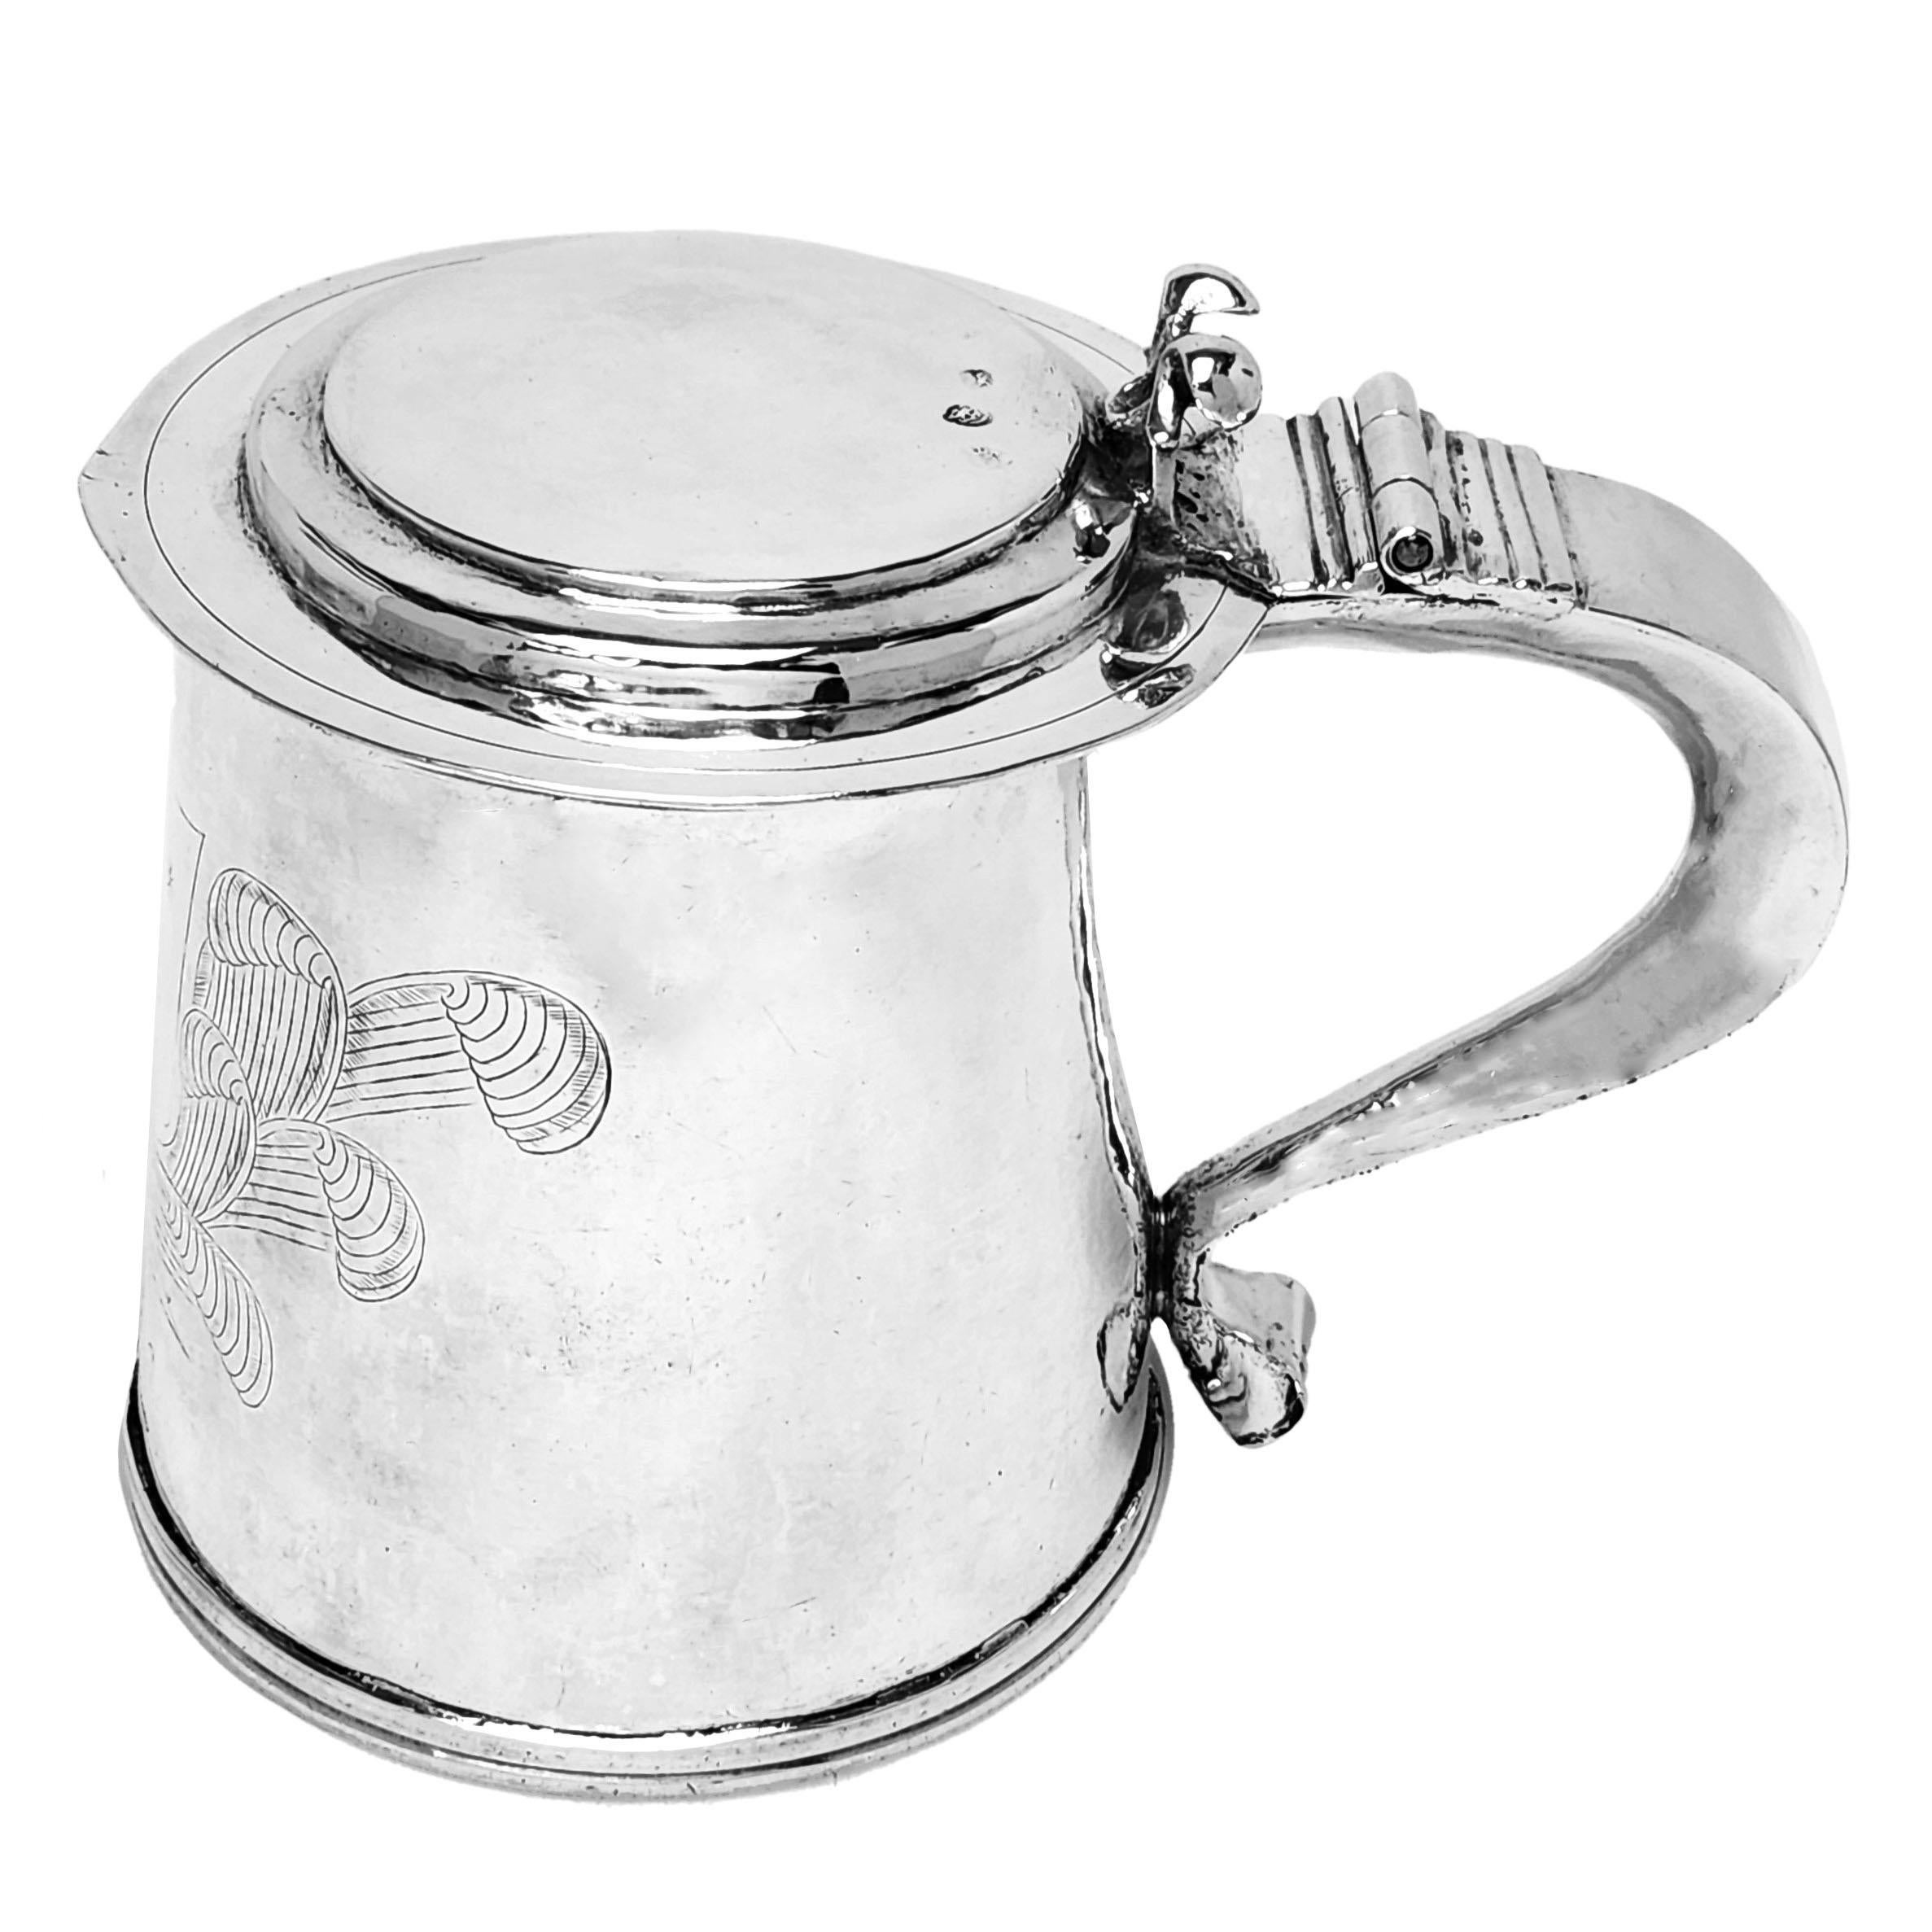 A magnificent Antique Charles II Lidded Tankard with a traditional straight sided tapered body. The Tankard has an large engraved armorial opposite a substantial scroll handle. The 17th century Tankard has a flat hinged lid with a curved thumb